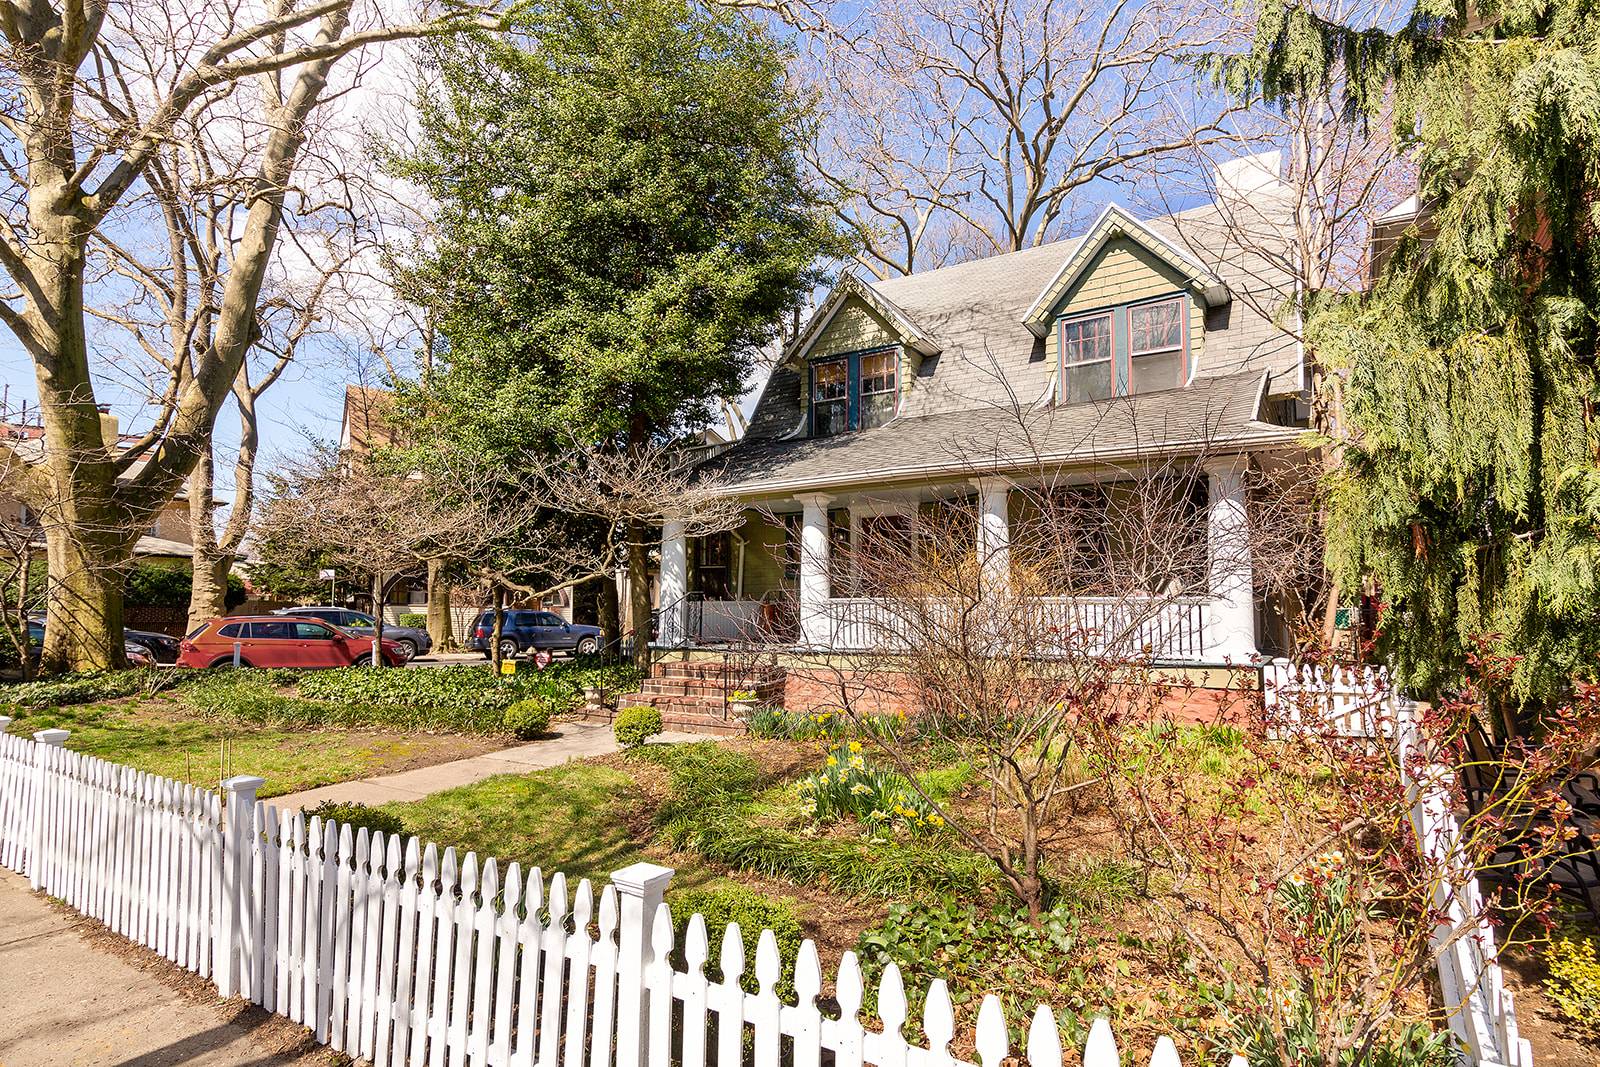 1101 Ditmas Avenue is an enchanting 1899 built Colonial situated on a picturesque corner lot with generous bucolic front and side gardens, with old growth Sycamores, surrounded by a white ...